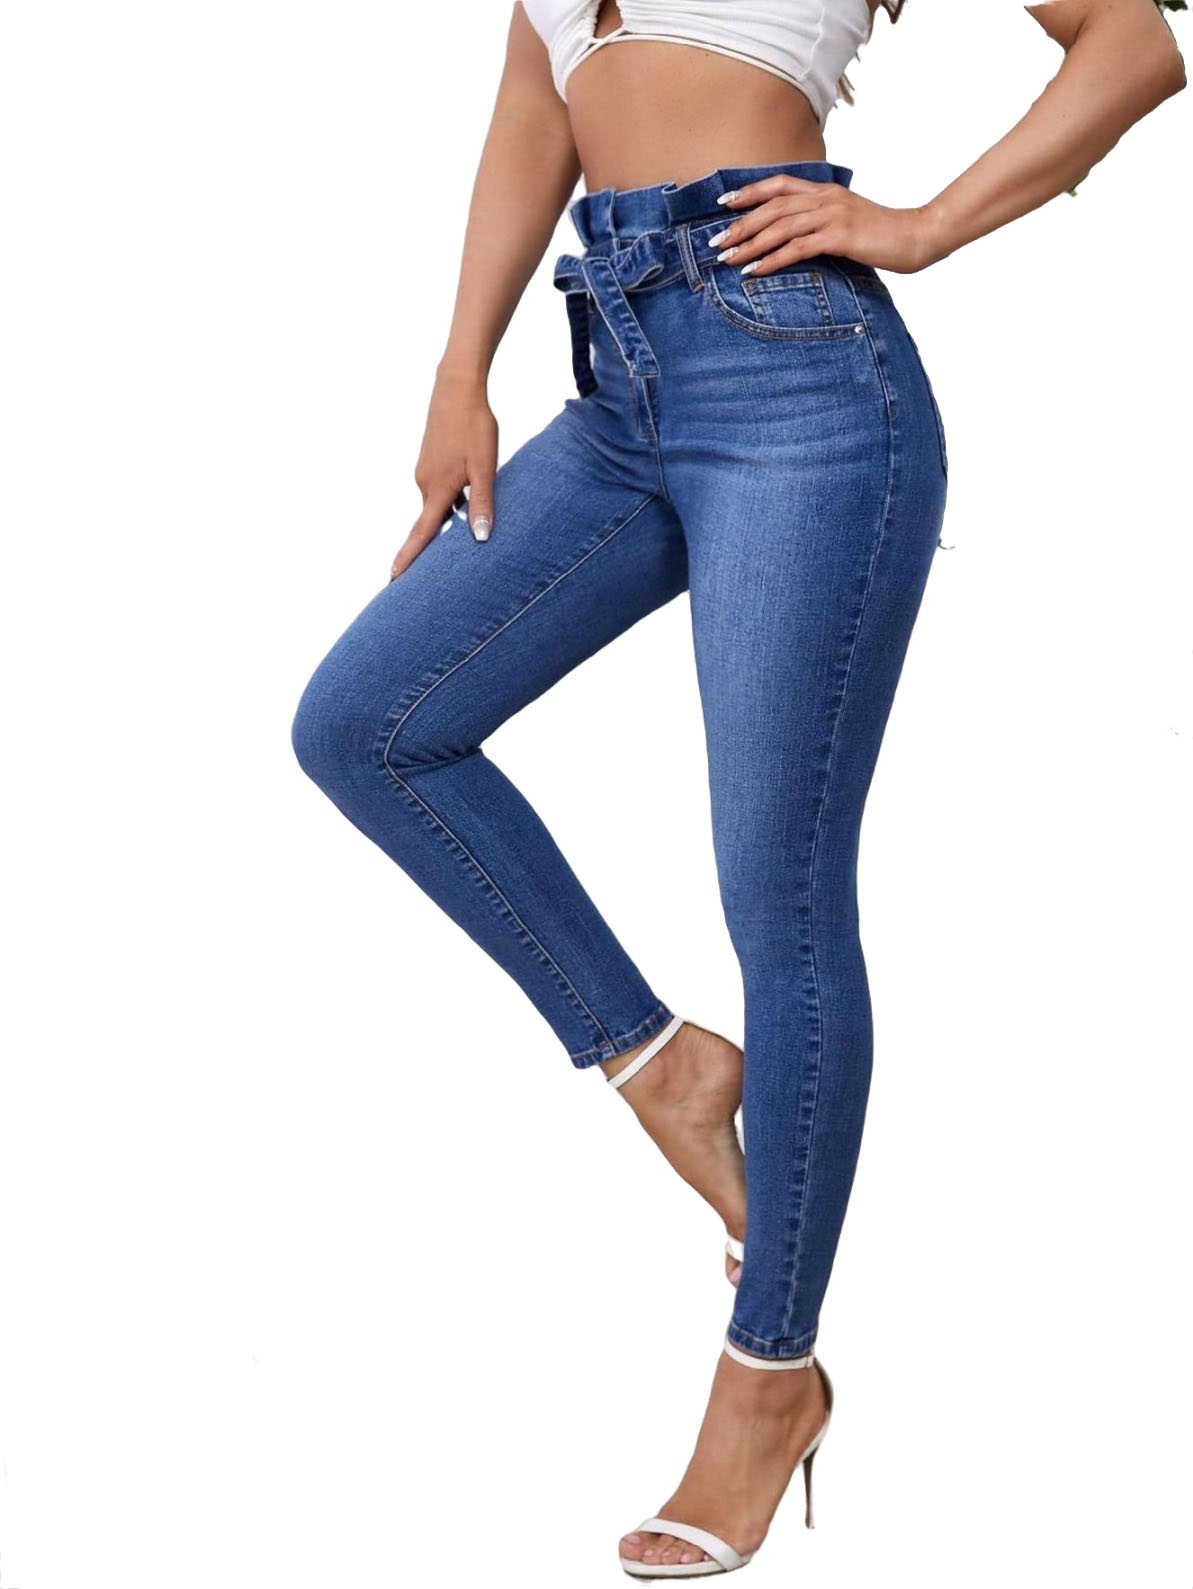 Women's High Waist Belted Skinny Jeans Casual Denim Pants